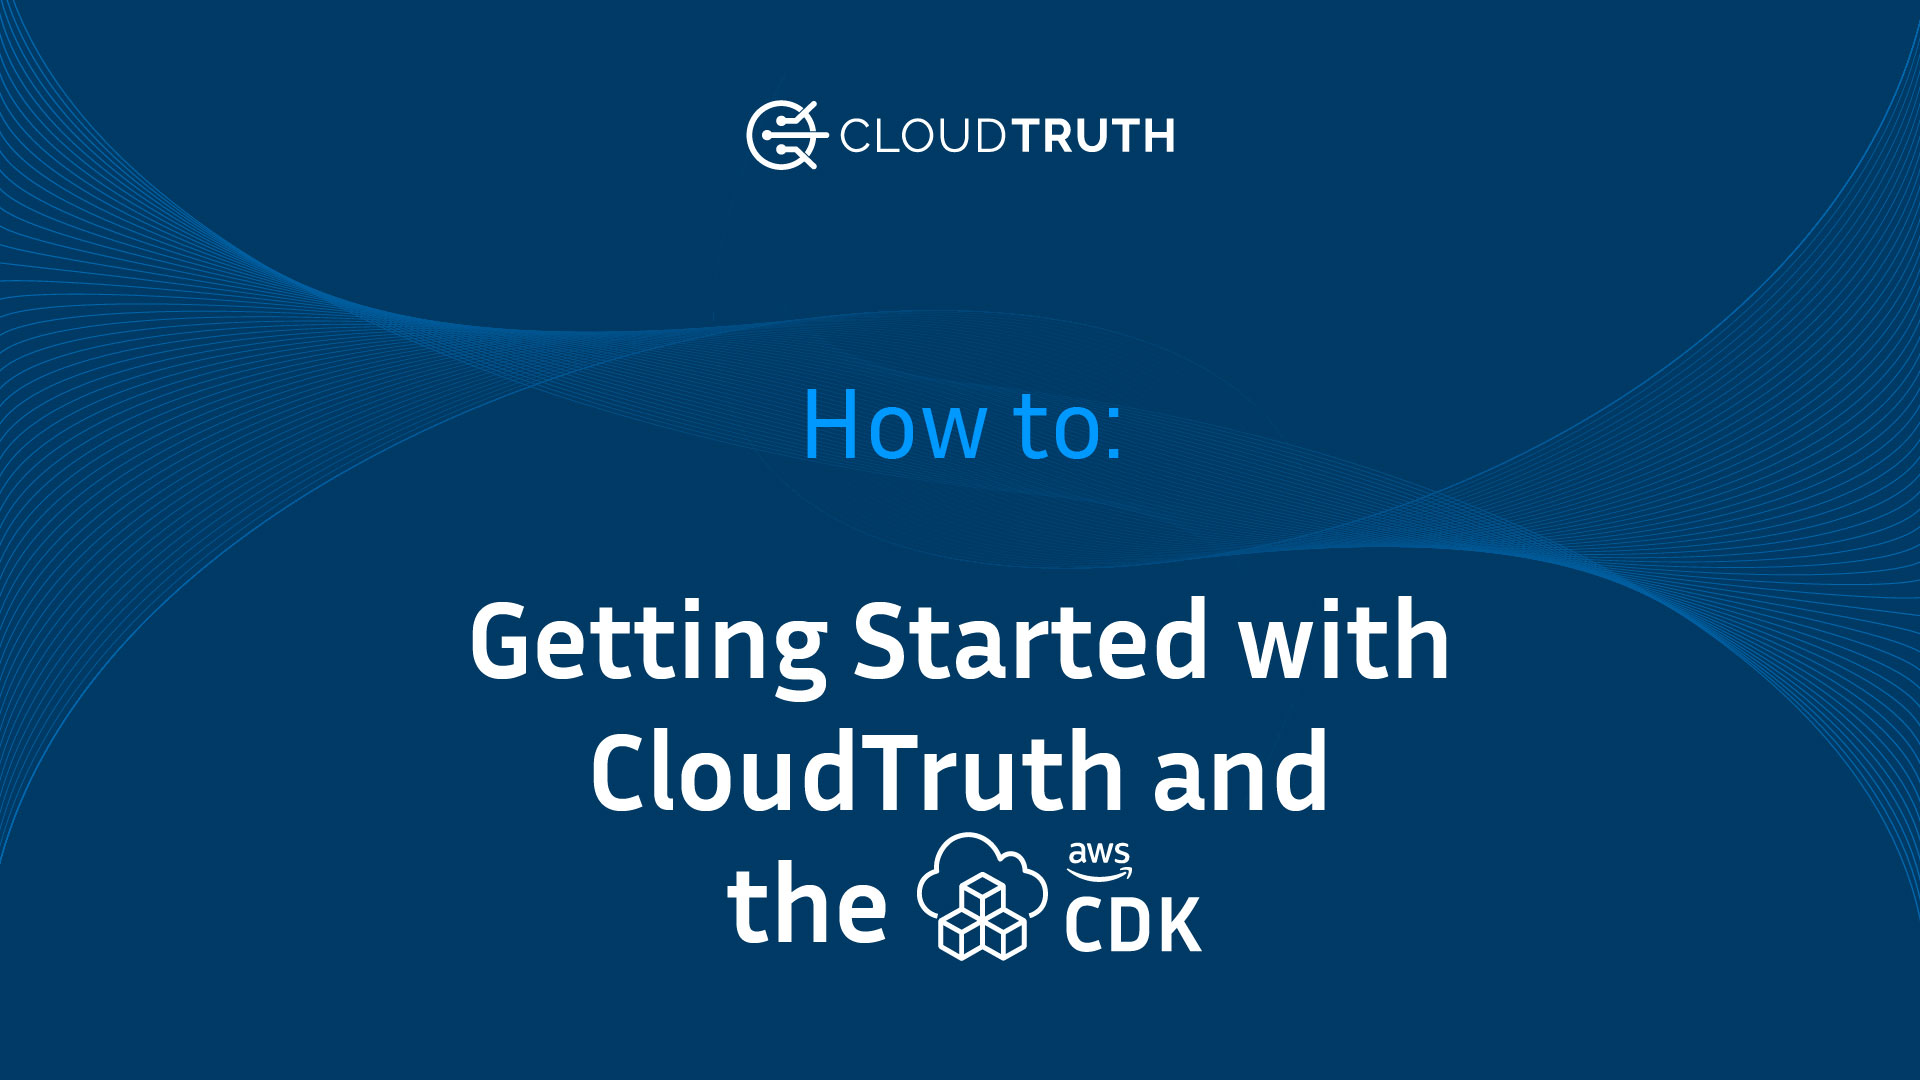 Getting Started with CloudTruth and the AWS CDK